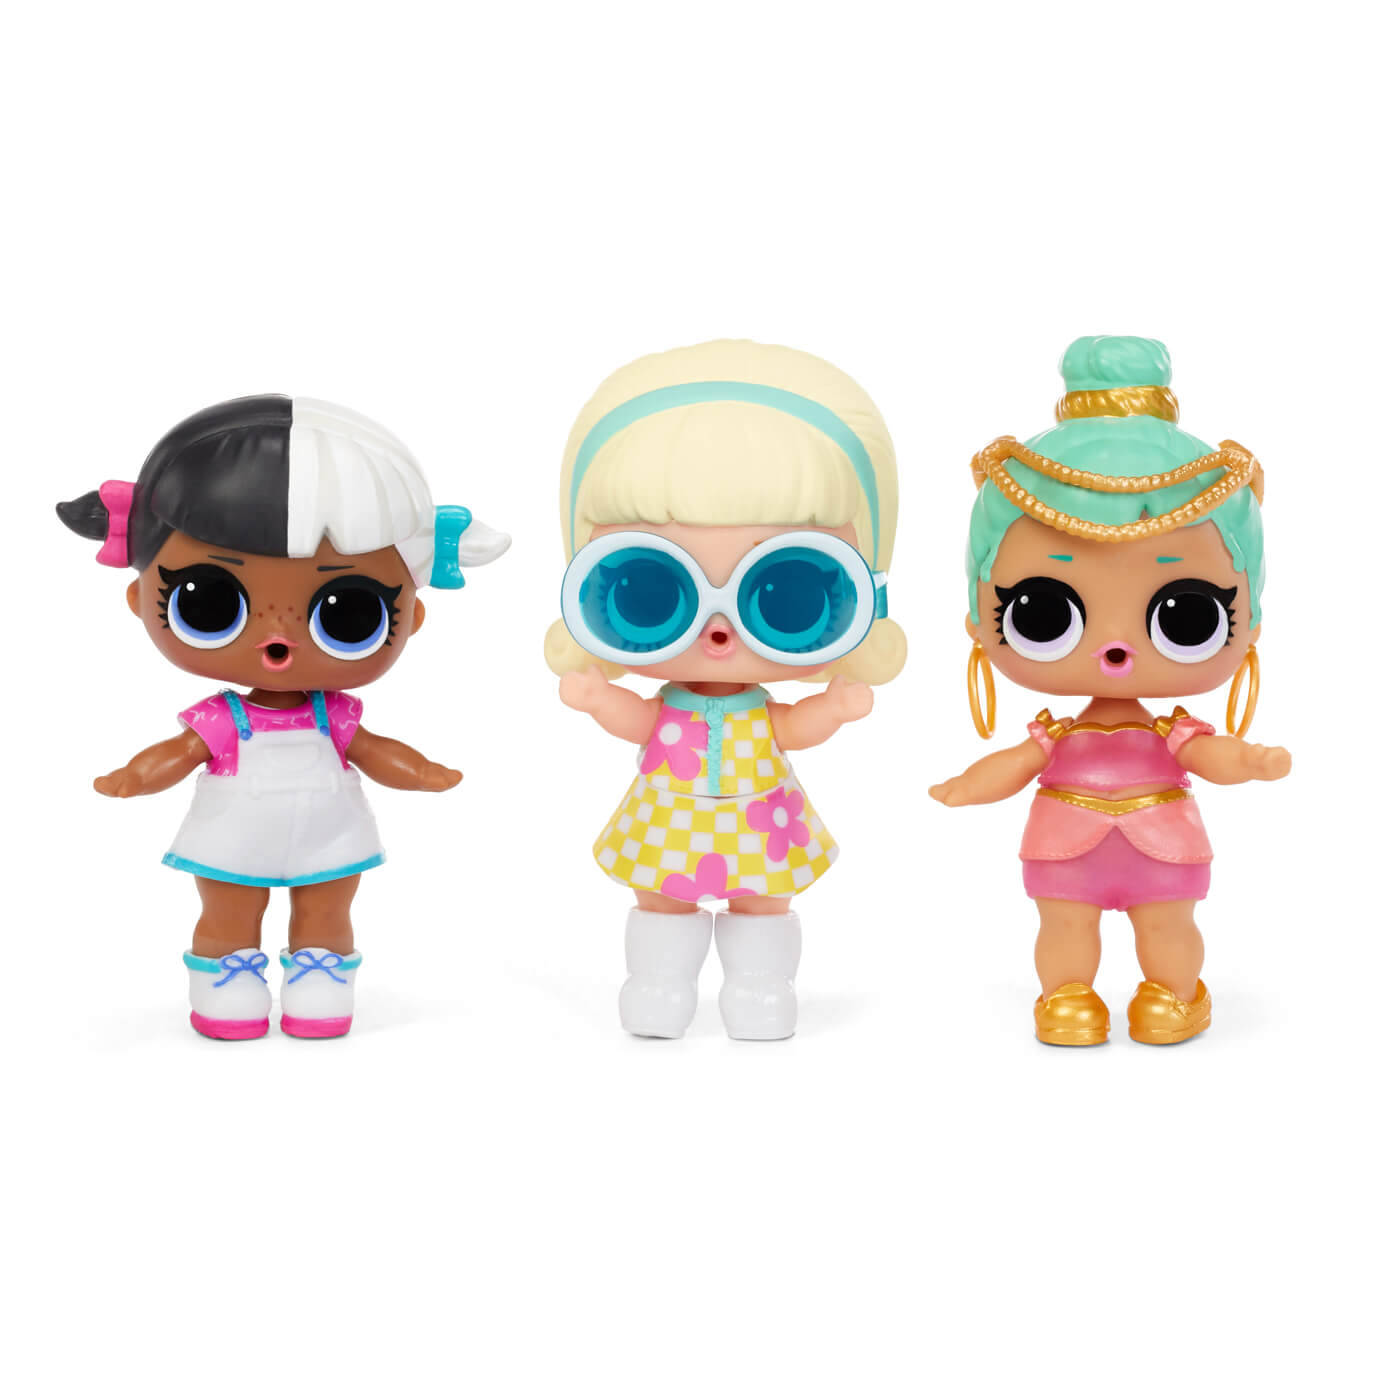 A Group Of Dolls With Sunglasses And Hair Wallpaper